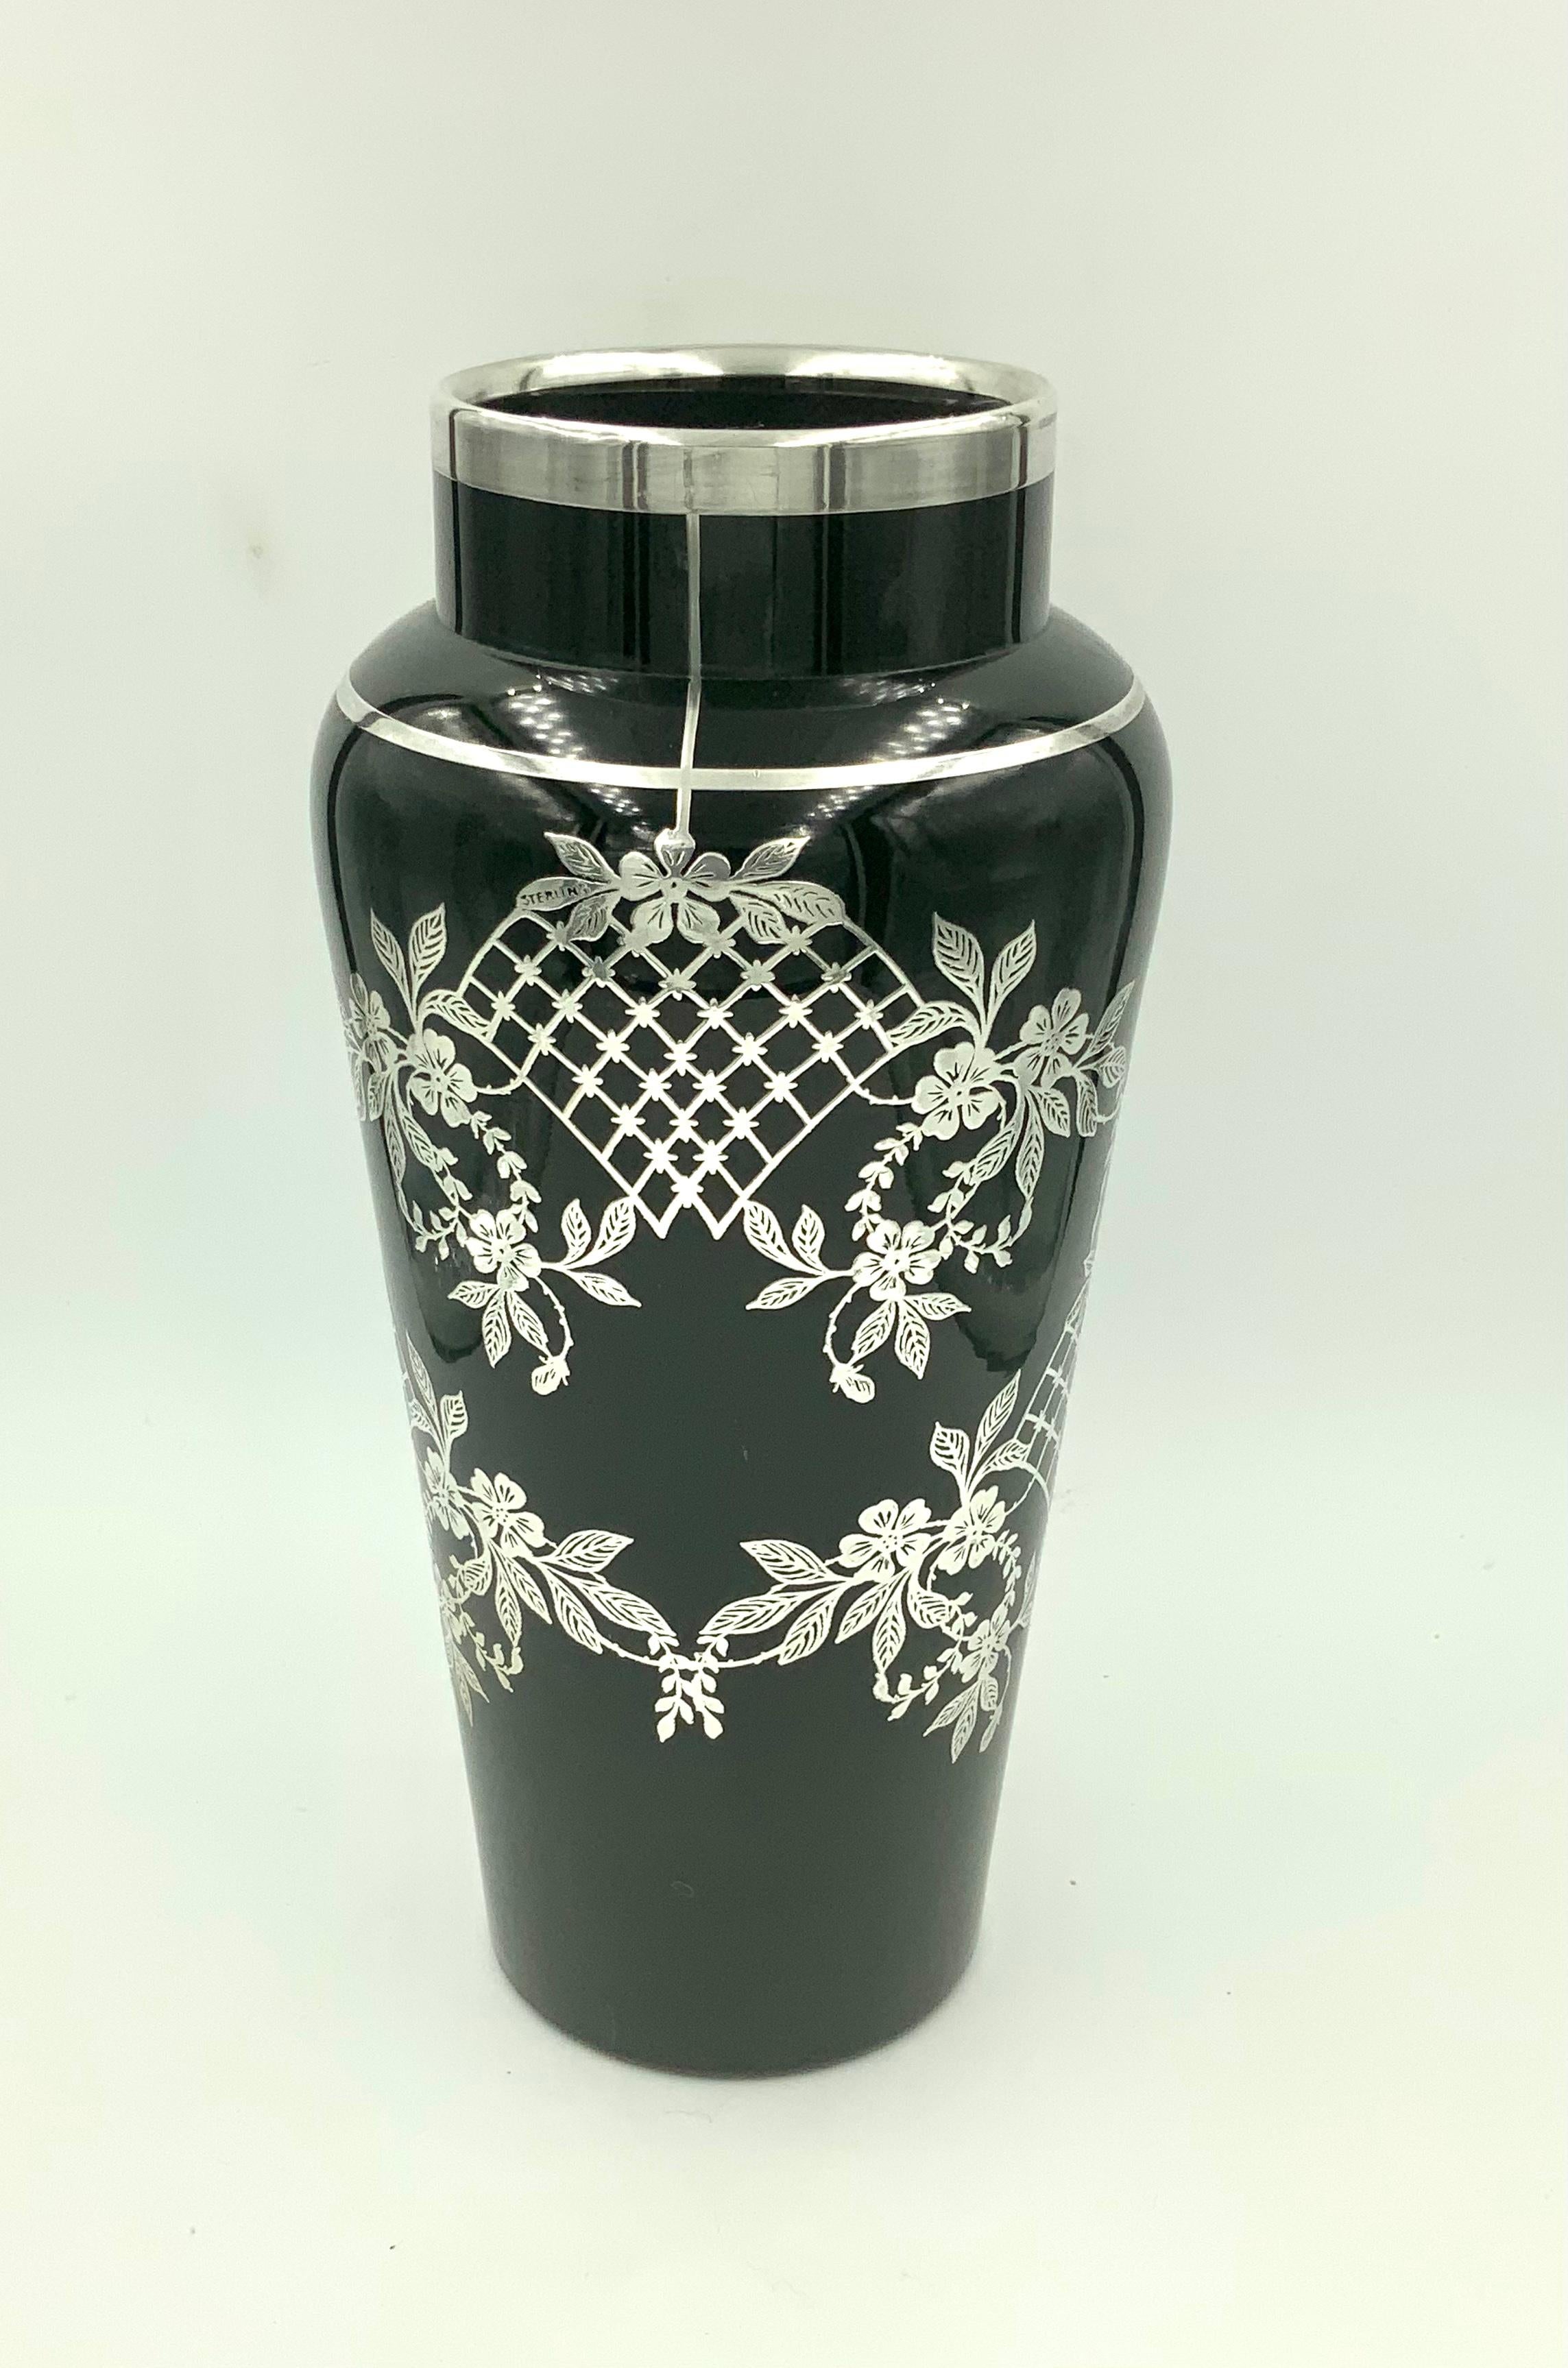 Elegant with sterling silver overlay black glass vase featuring a lattice flowers and leaves design. With a sterling rim at the top.
 